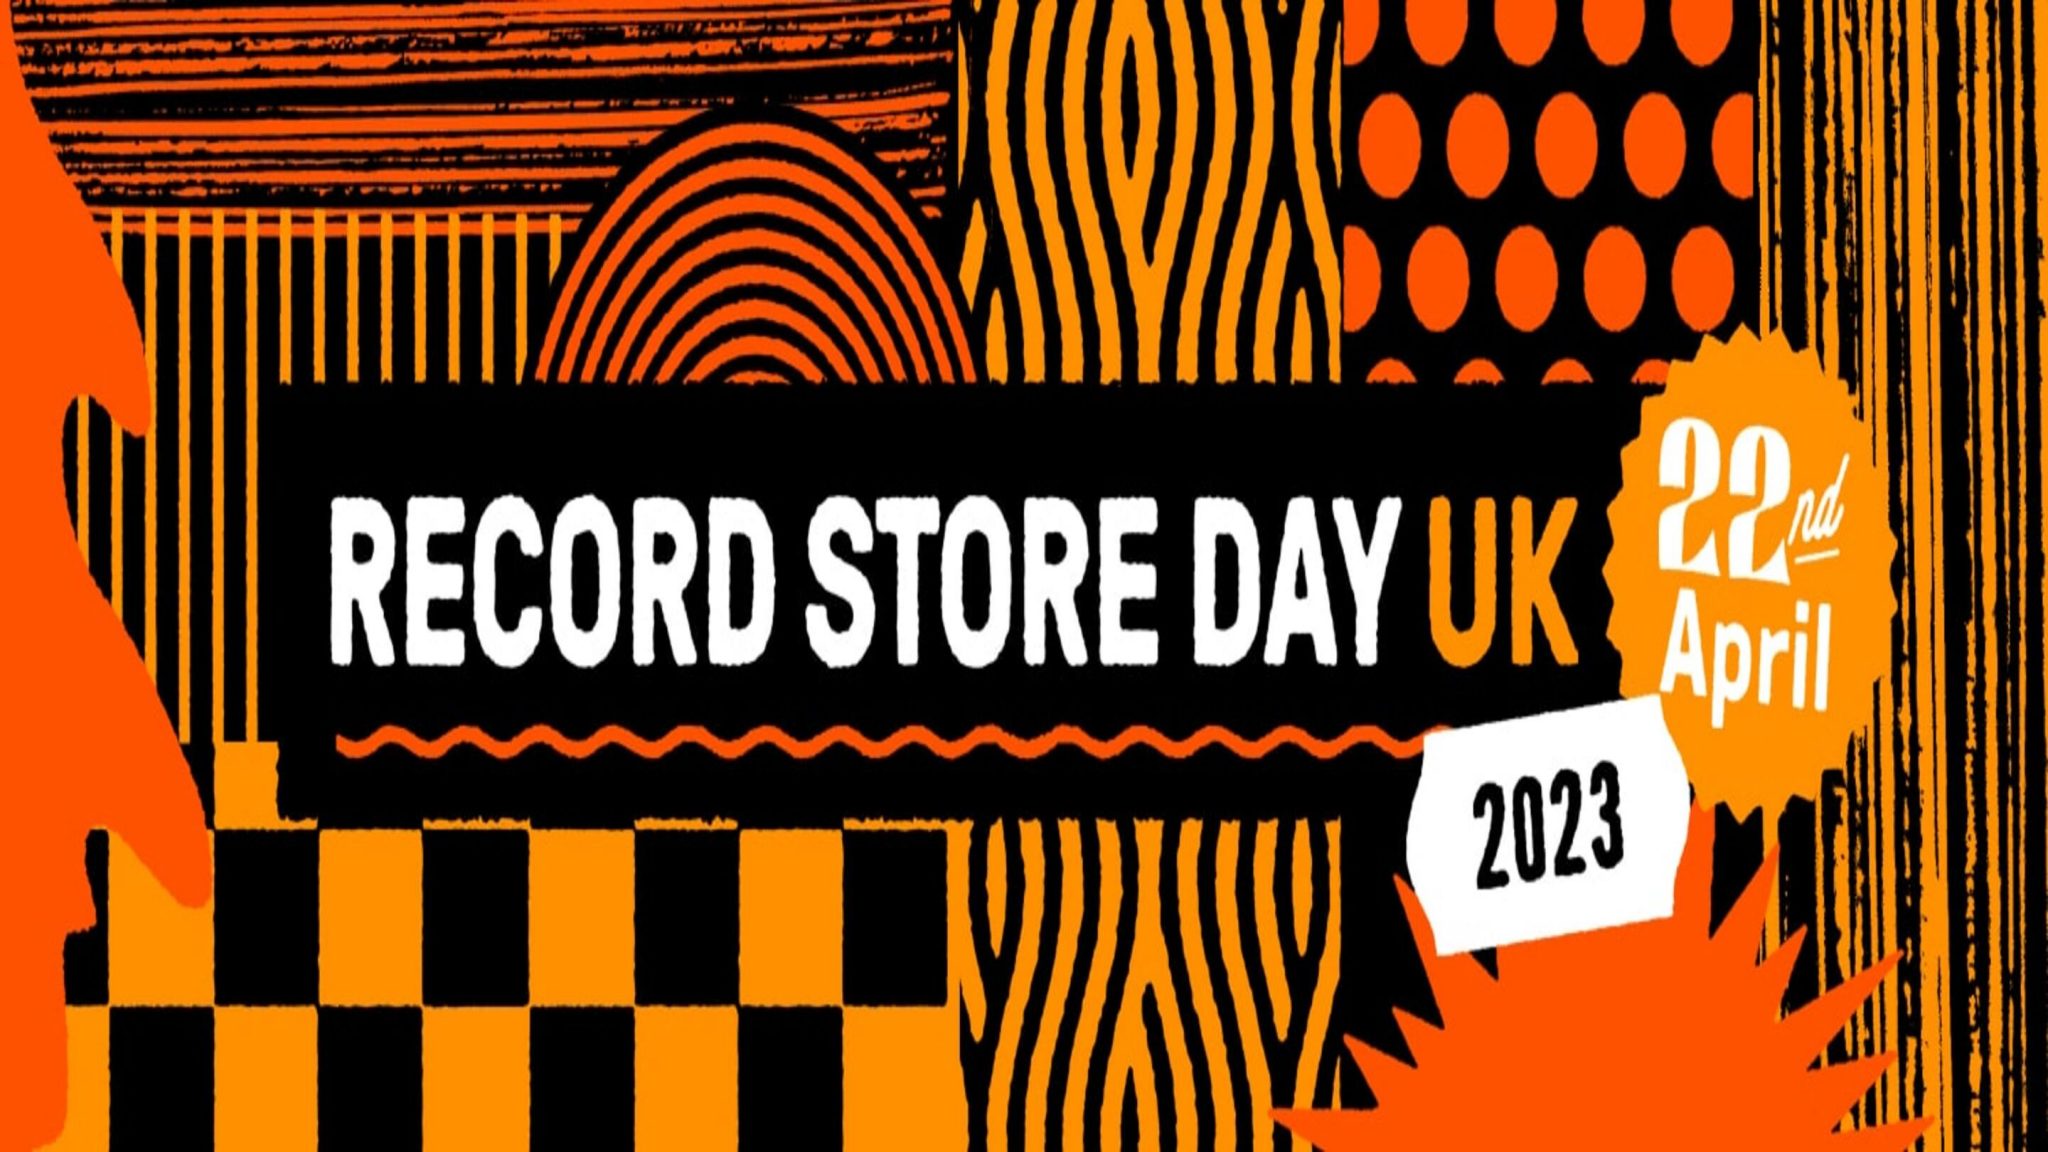 RECORD STORE DAY 2023: PARTICIPATING SCOTTISH RECORD STORES